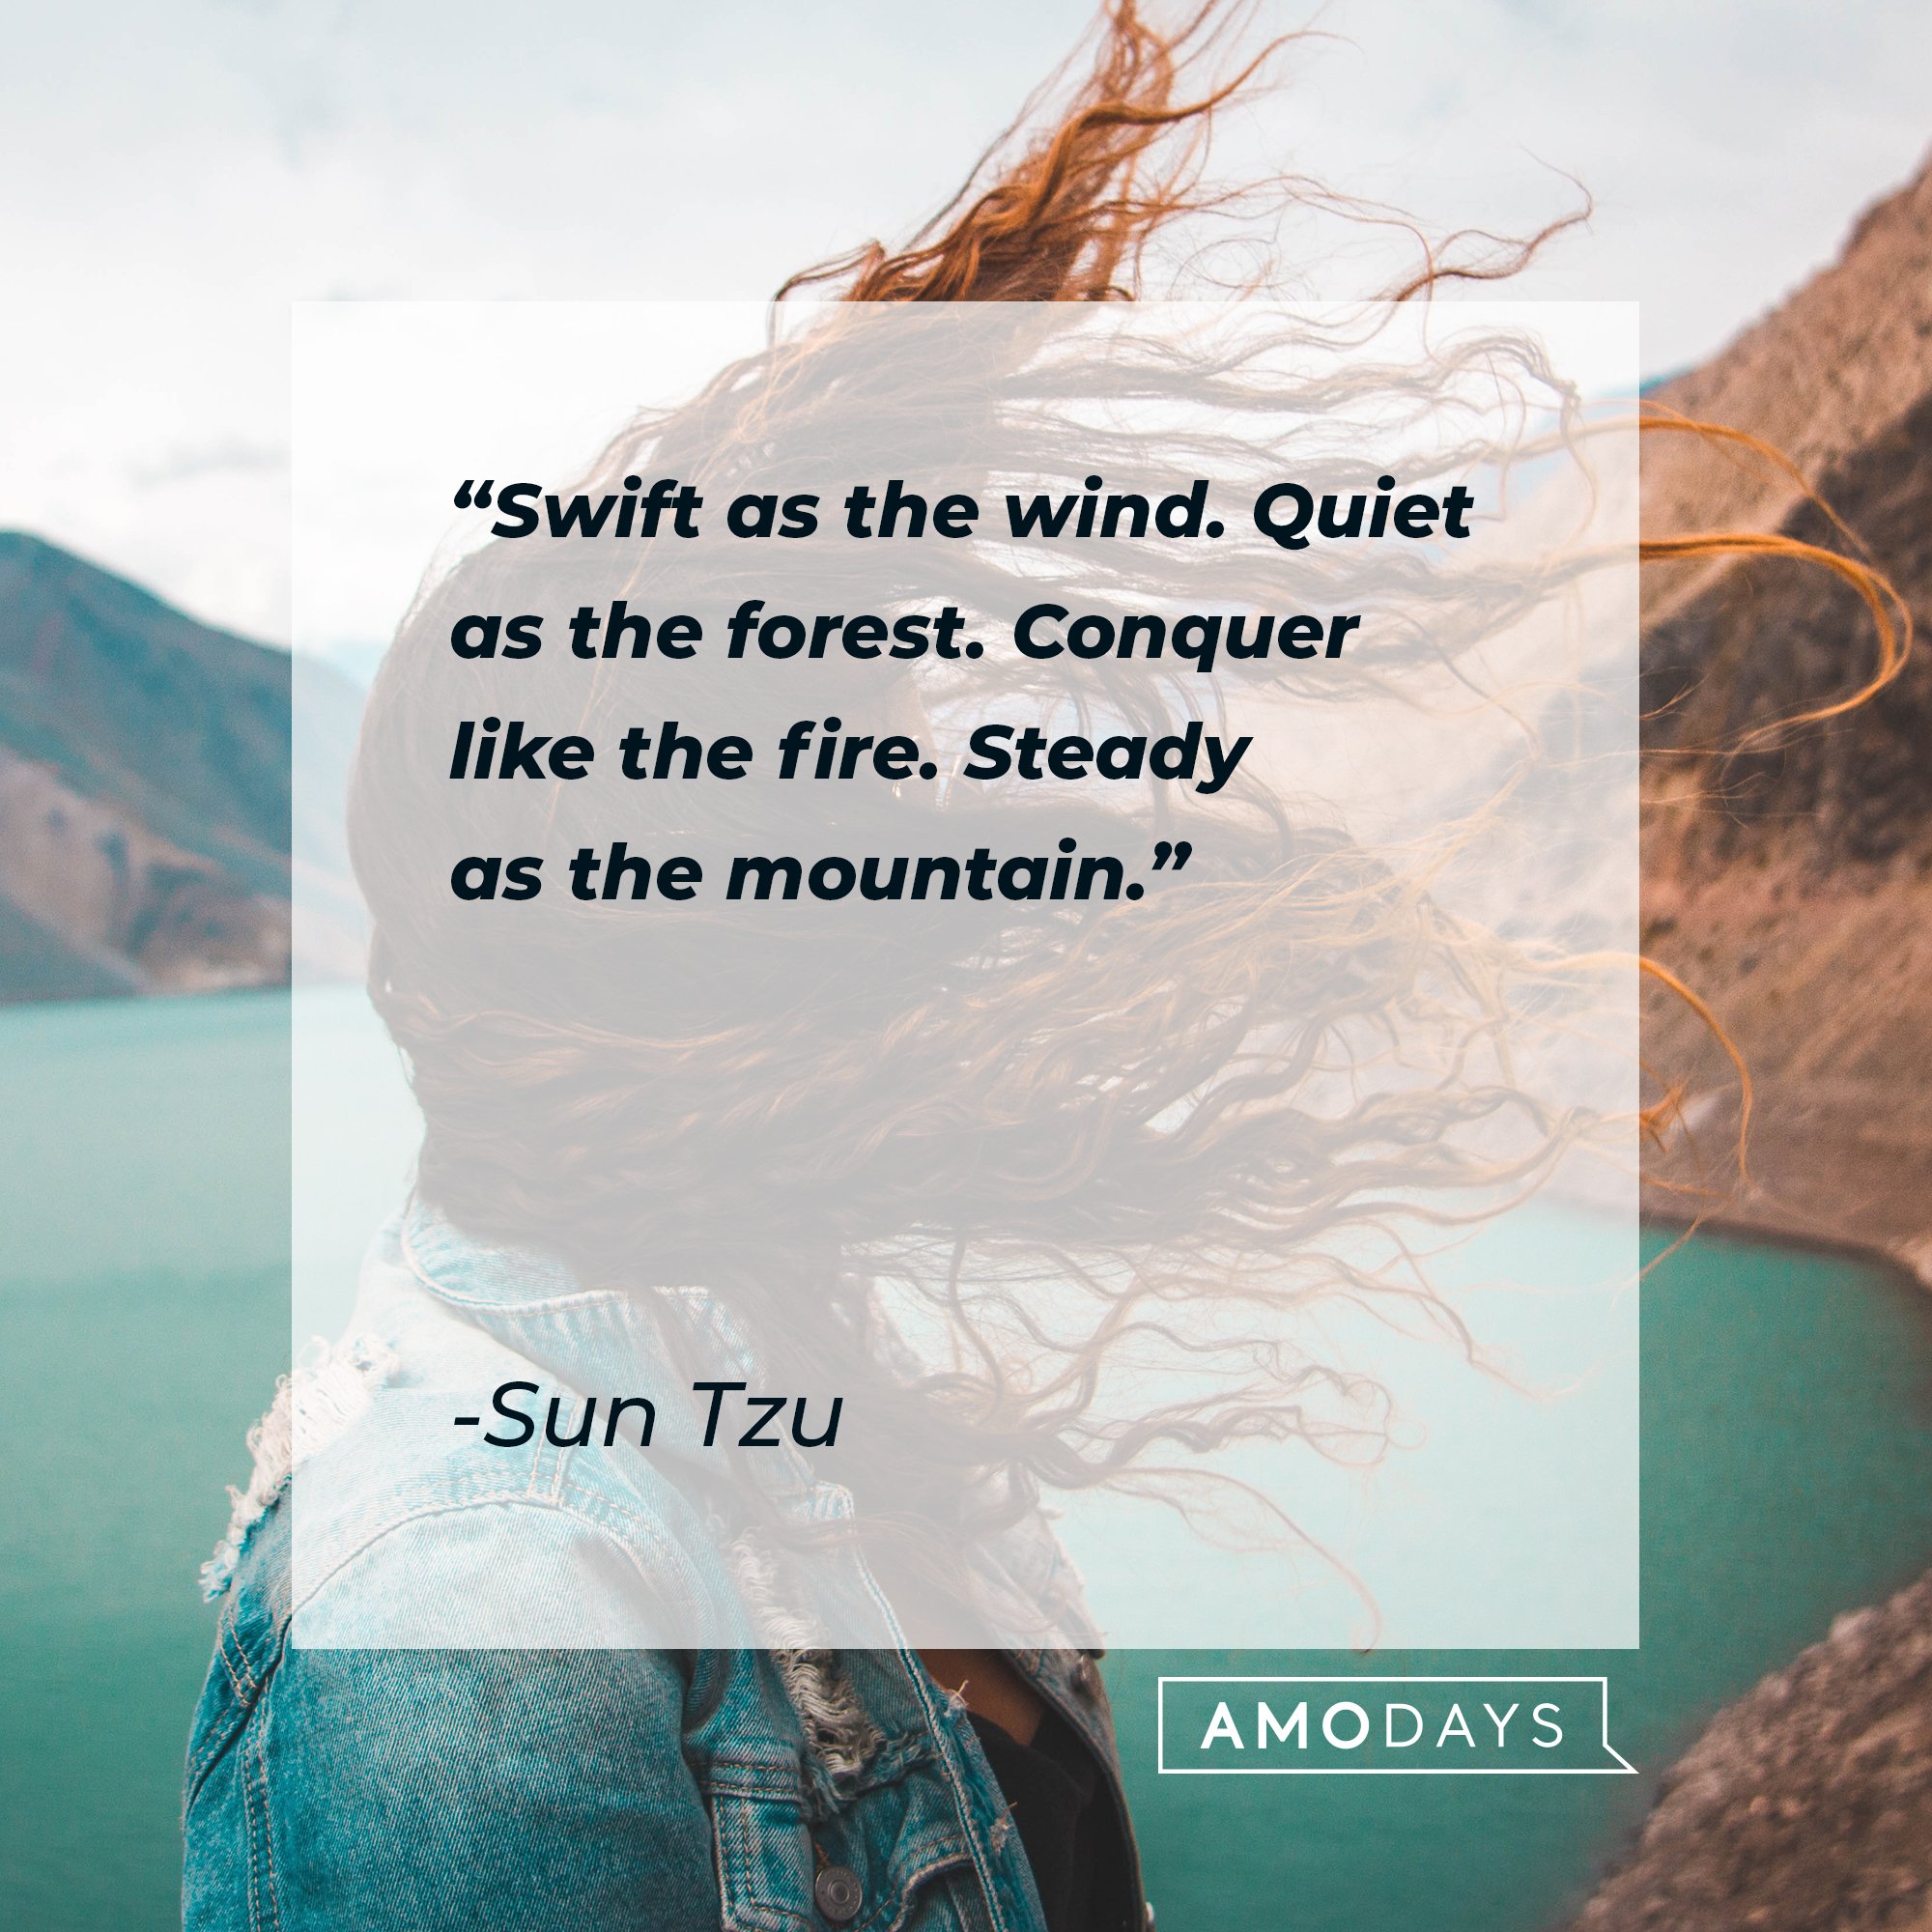 Sun Tzu's quote: "Swift as the wind. Quiet as the forest. Conquer like the fire. Steady as the mountain." | Image: AmoDays